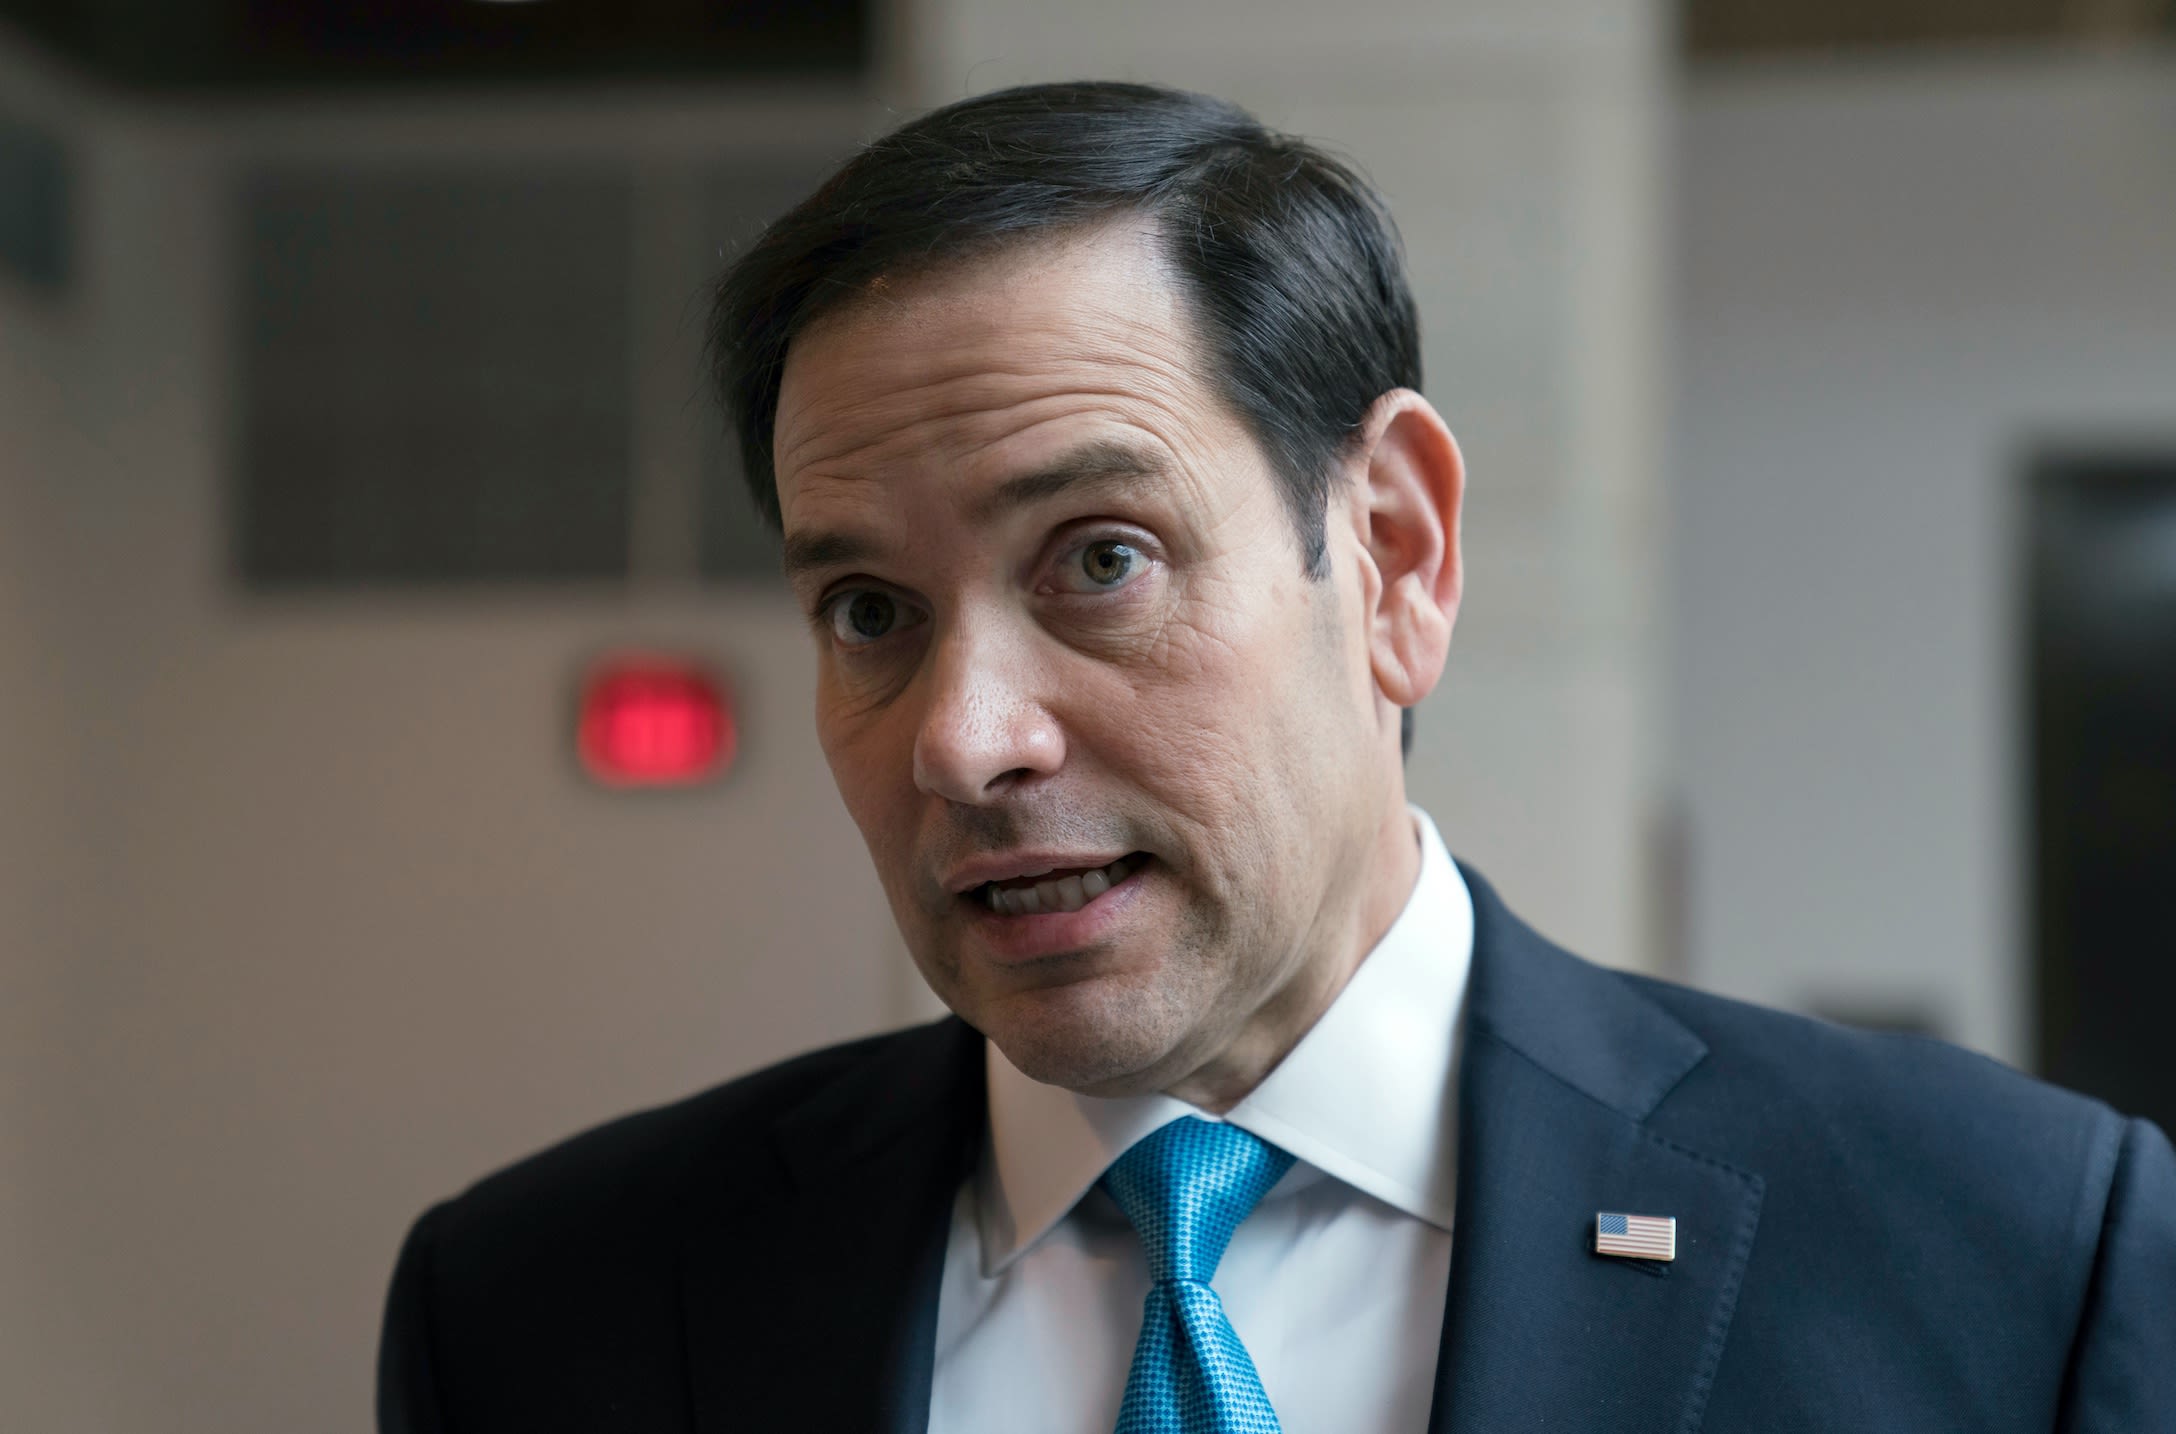 ‘Marco Rubio Sold Out’: Senator Called Out for Wild Flip-Flops as a Trump ‘Enabler’ in Brutal Column